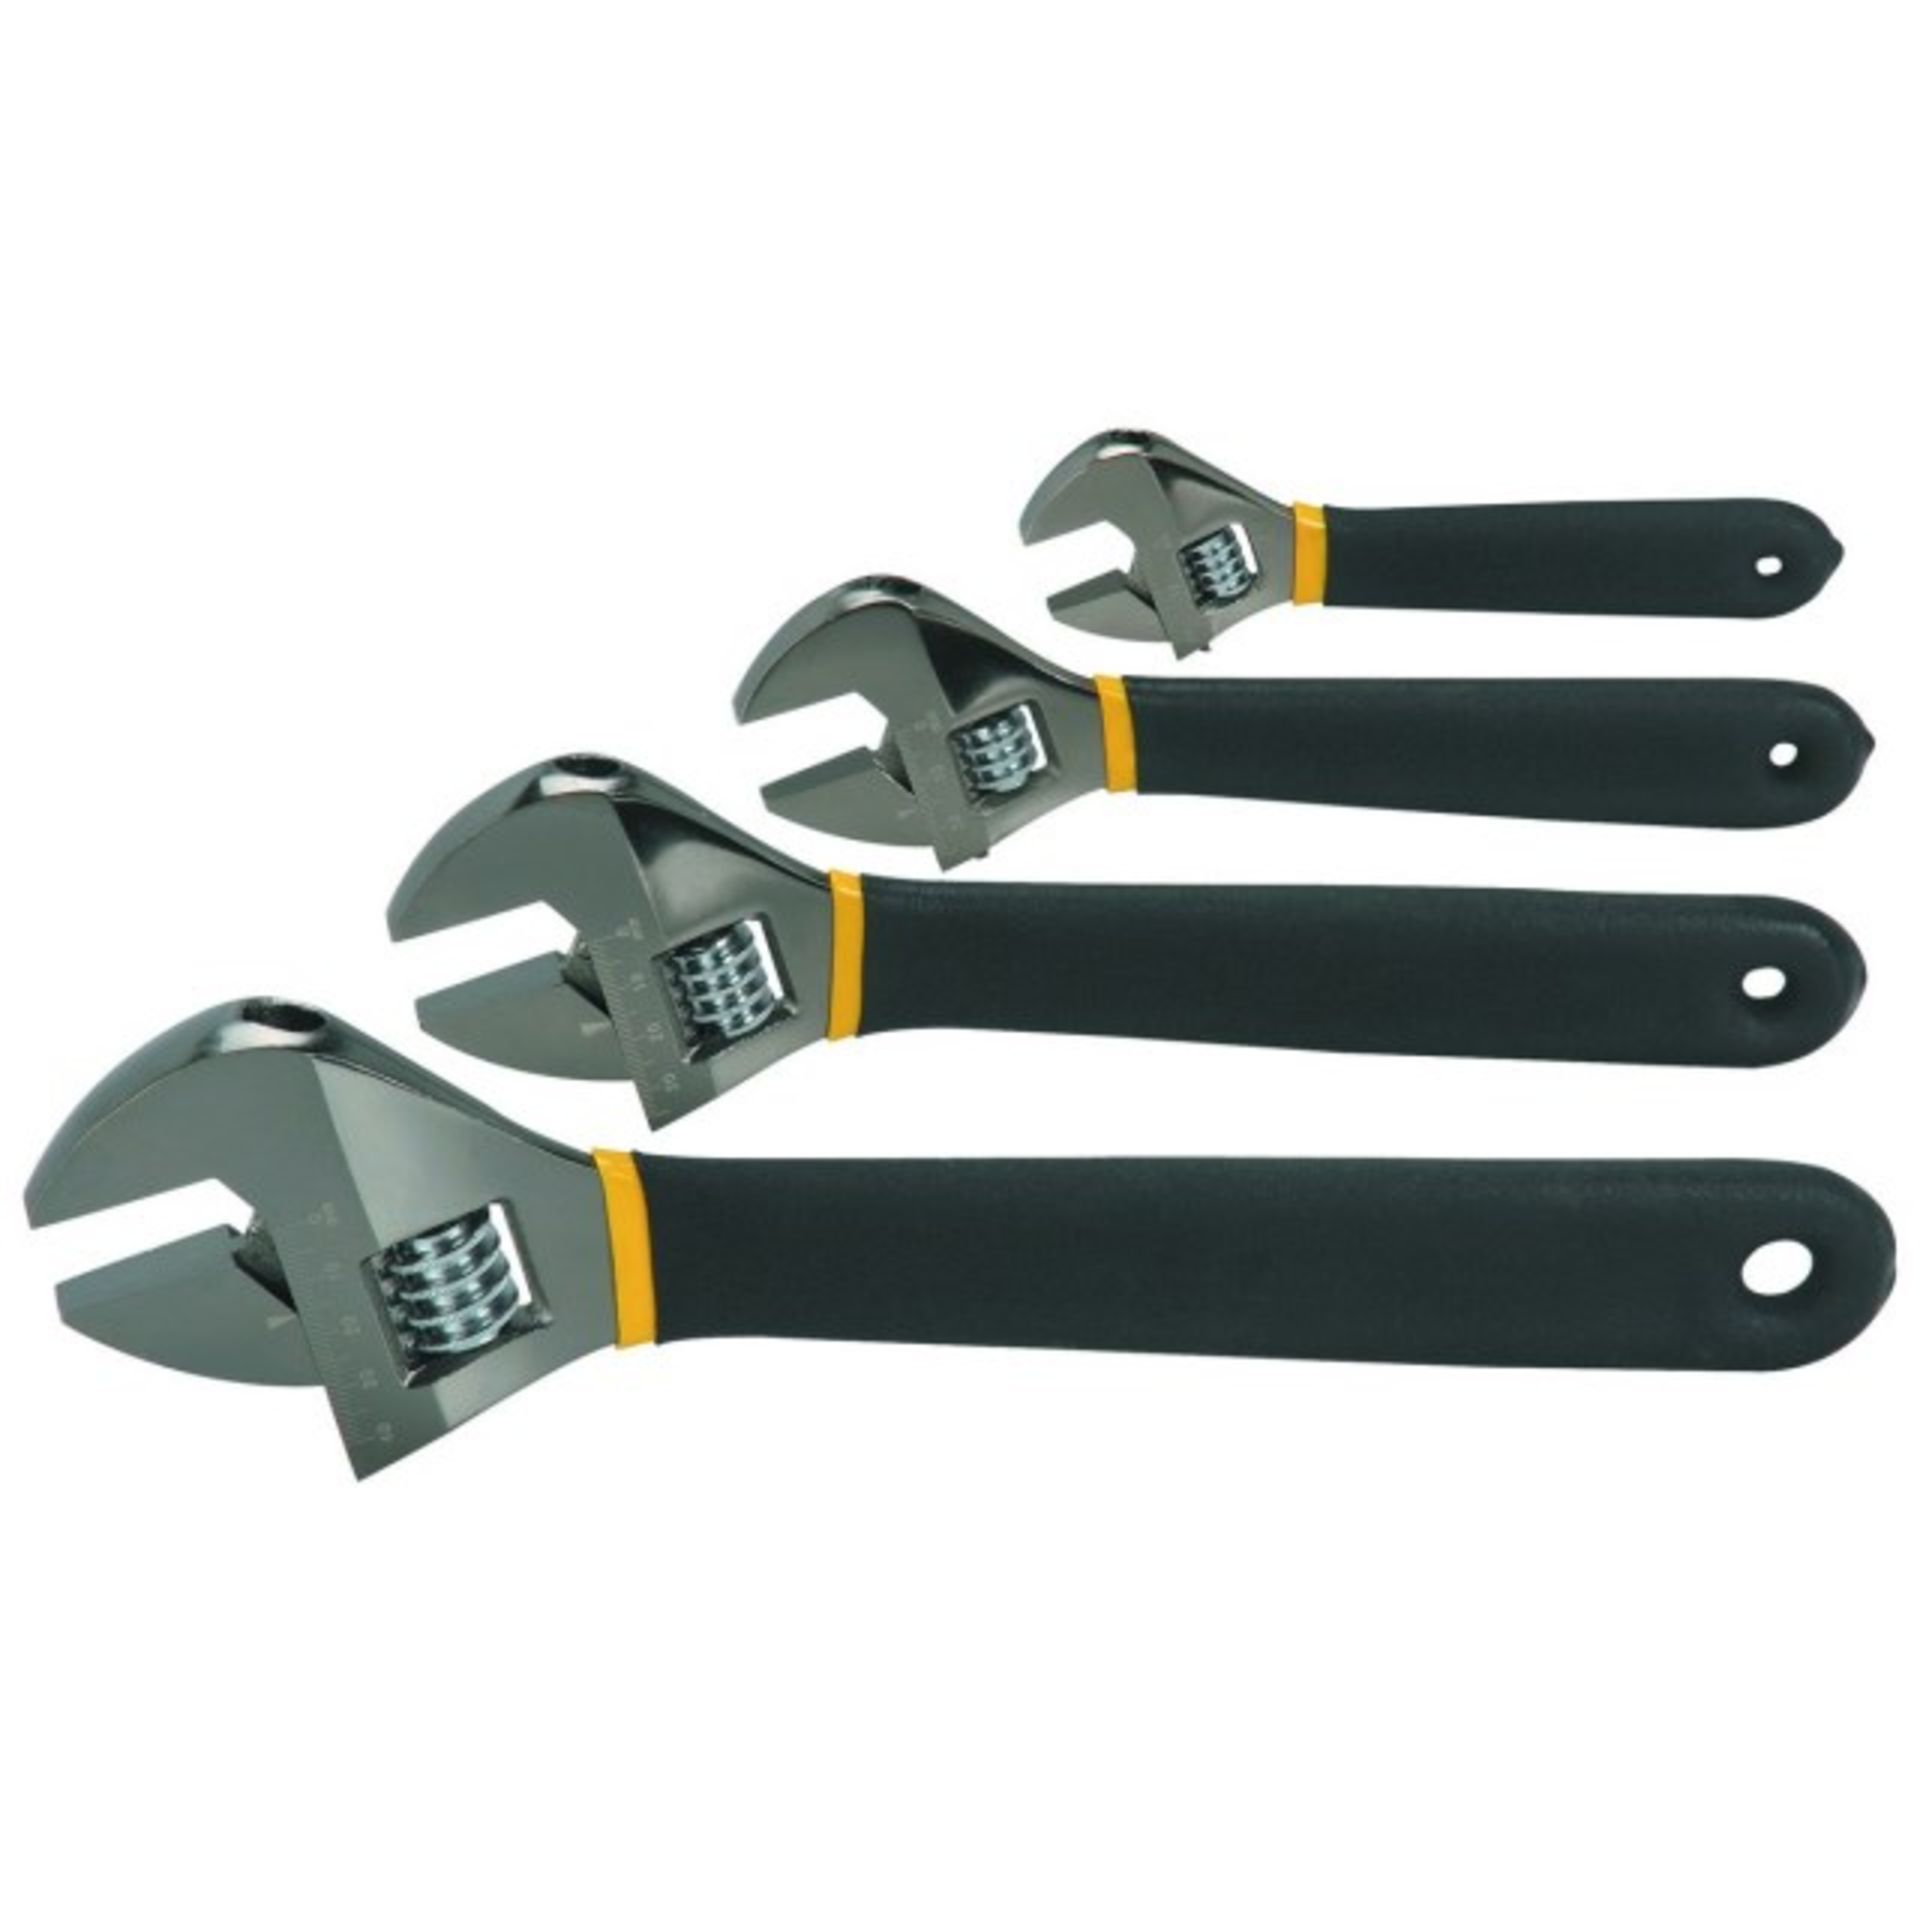 V Brand New Large Four Piece Adjustable Spanner Set Up To 12 Inch X 2 YOUR BID PRICE TO BE